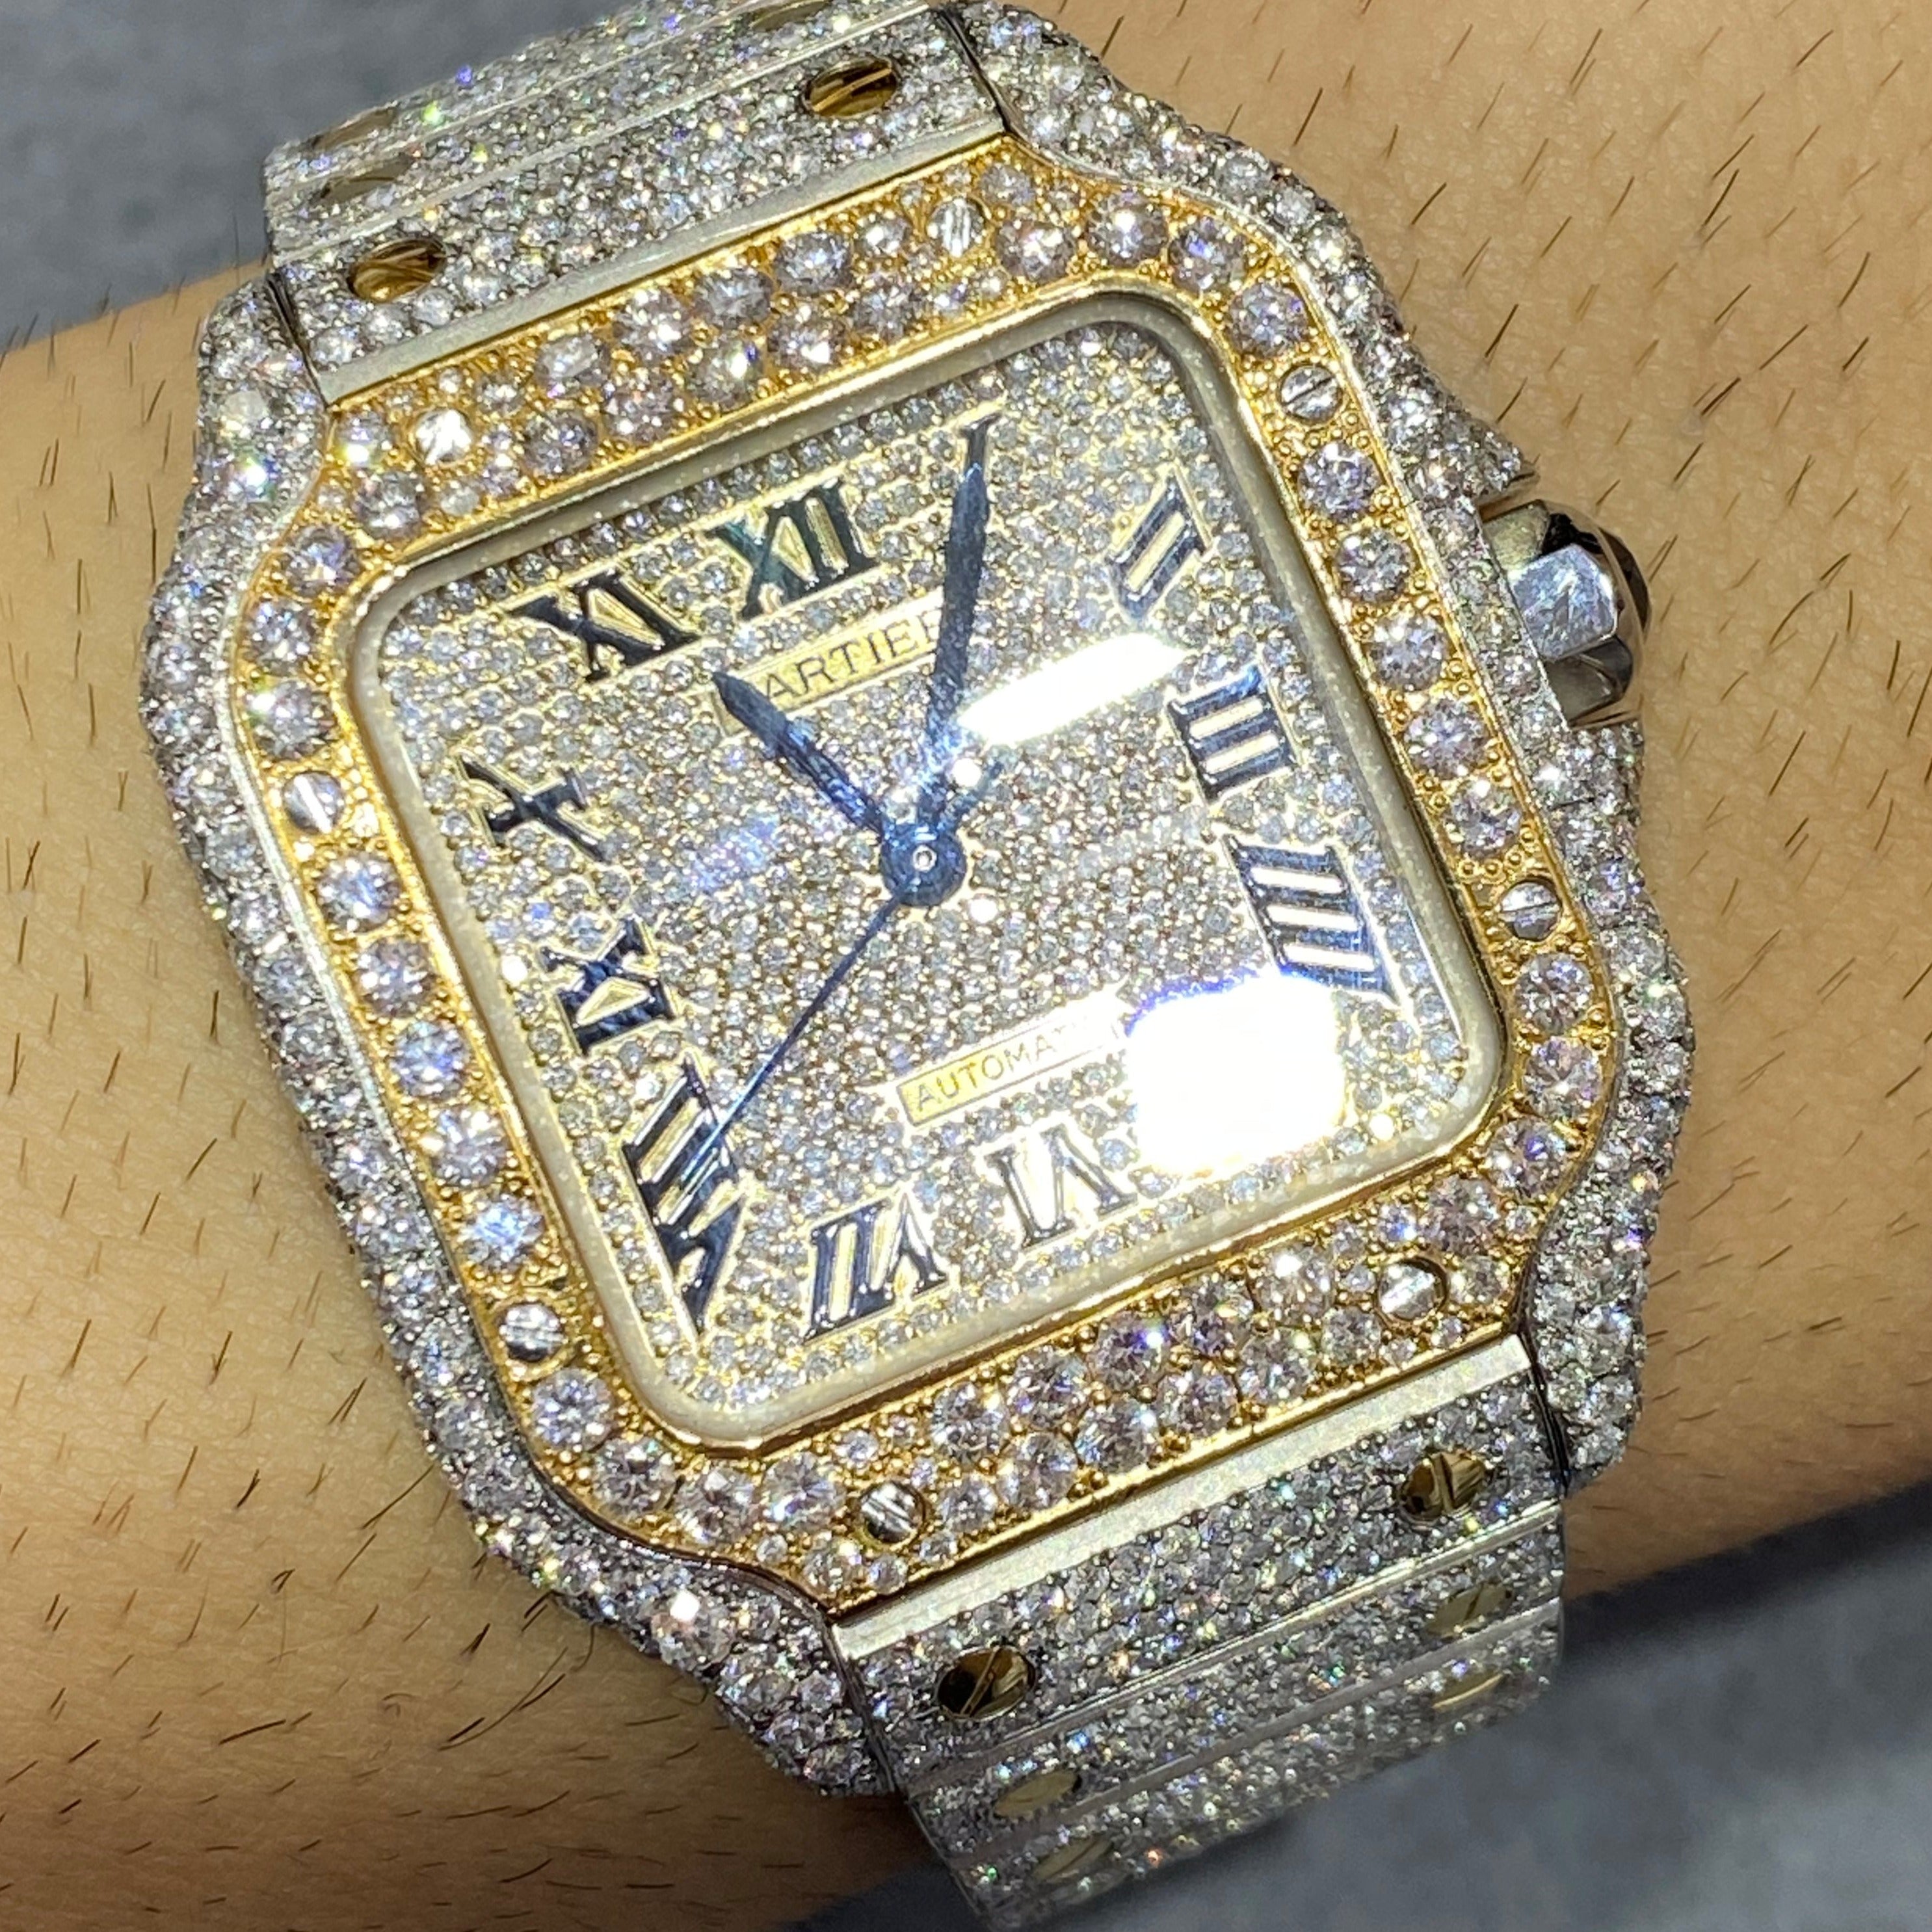 new 41 mm cartier santos xl watch “iced bustdown “2-tone 18k screws on band vs1 natural 💎22cts.t.w.